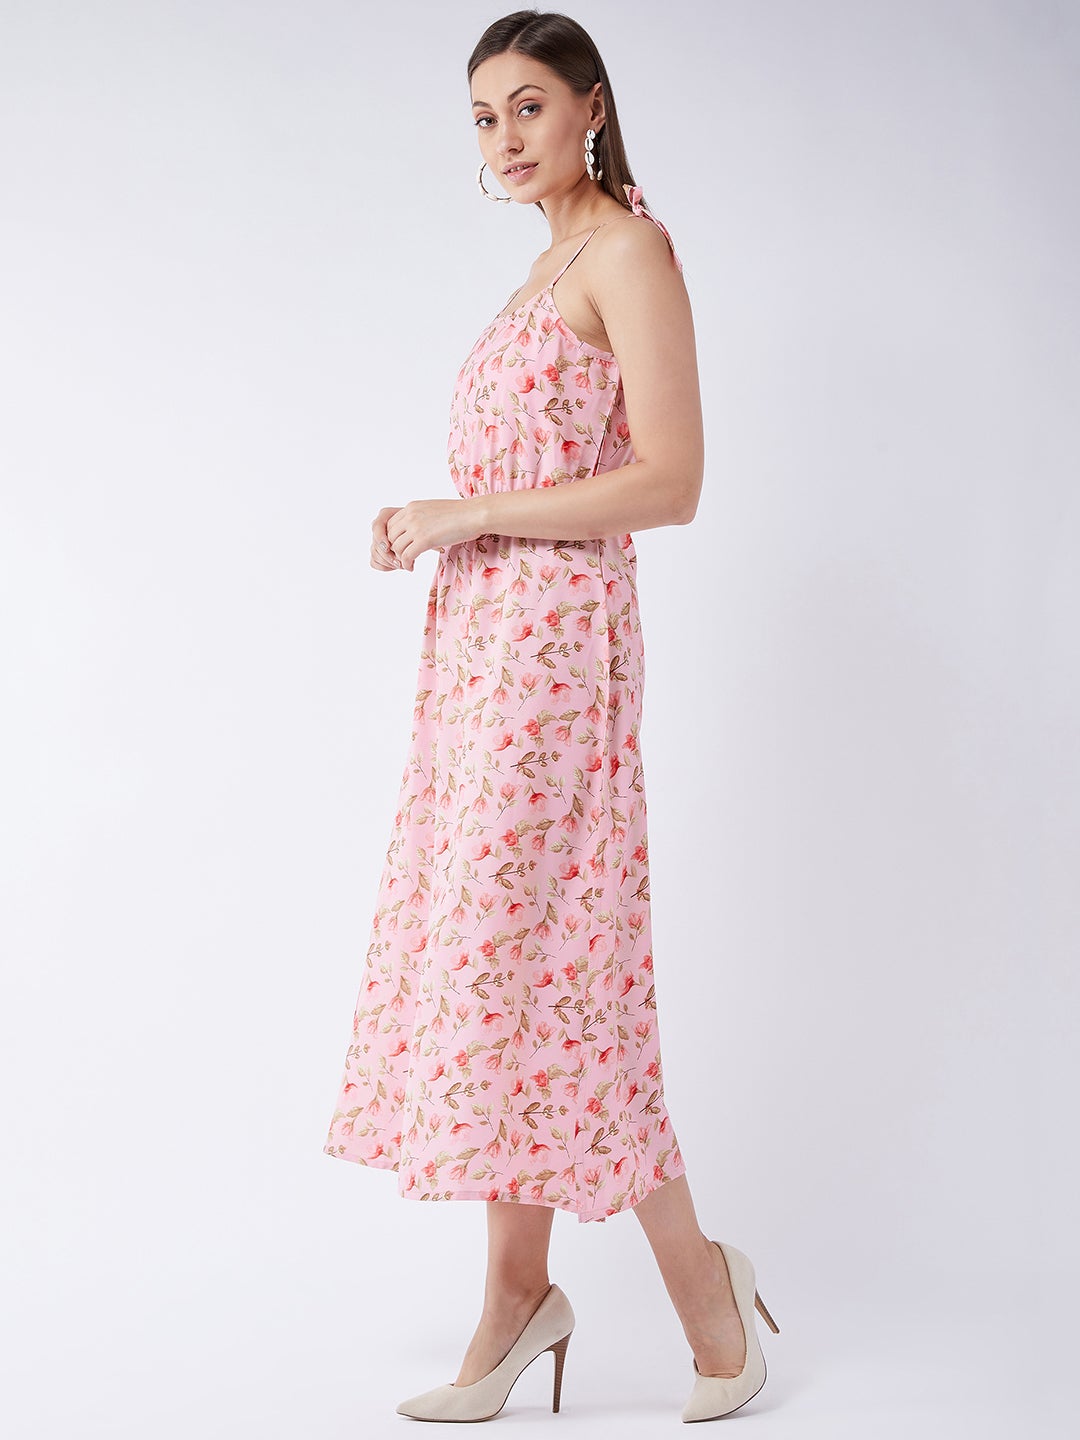 Baby Pink Floral Elasticated Dress